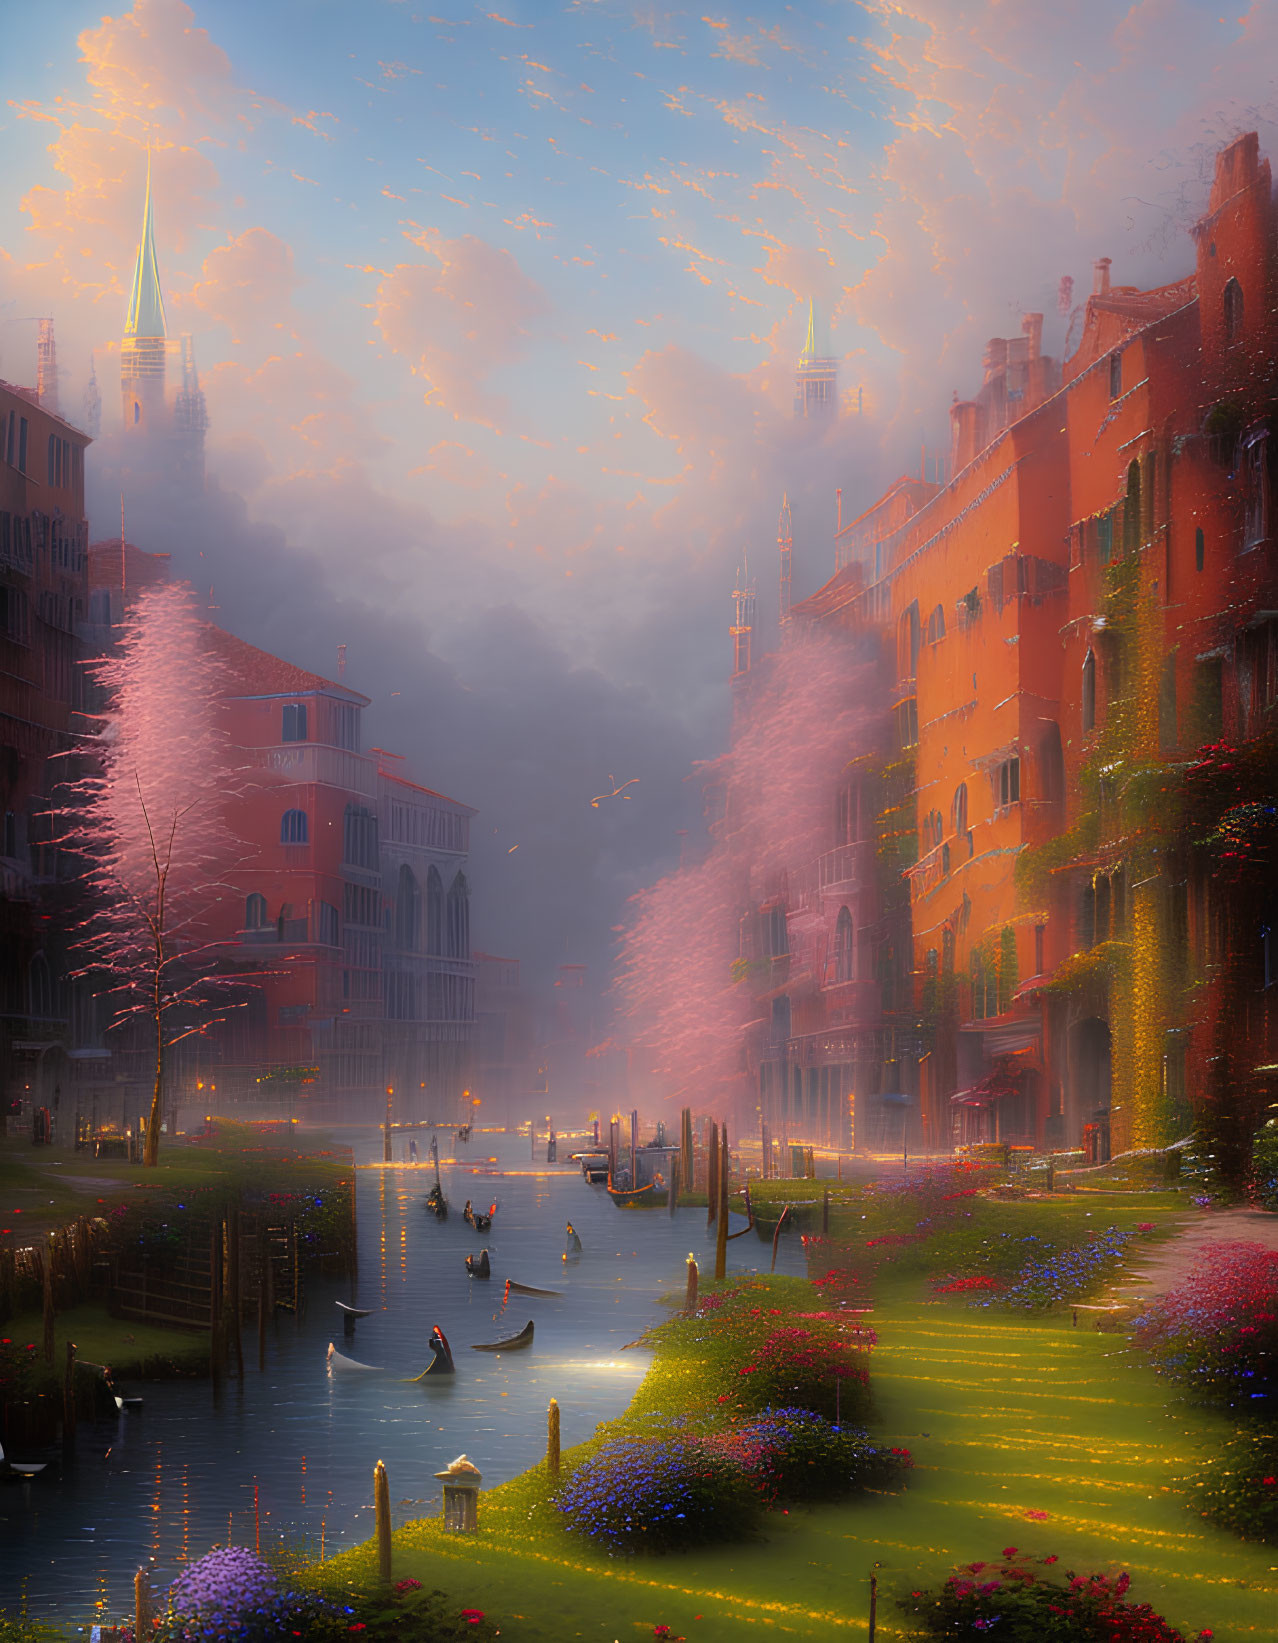 Venetian canal with glowing flora, gondolas, vibrant buildings, pink-tinged sky